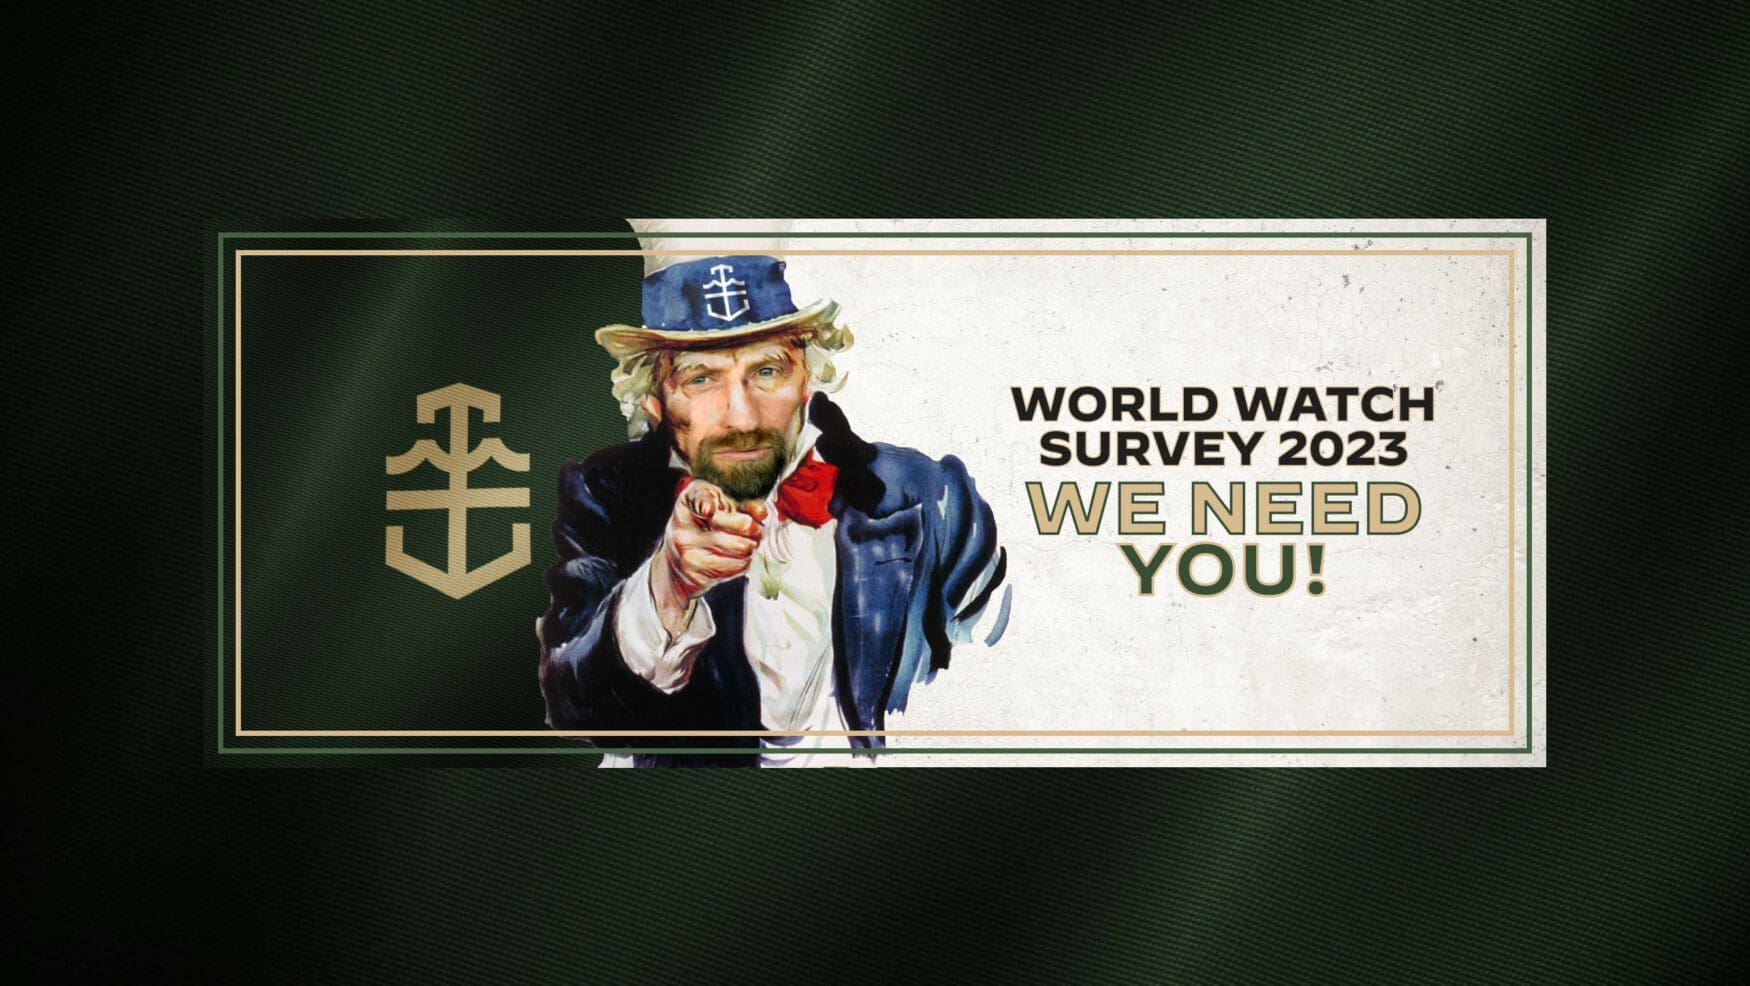 We need YOU to answer this survey…